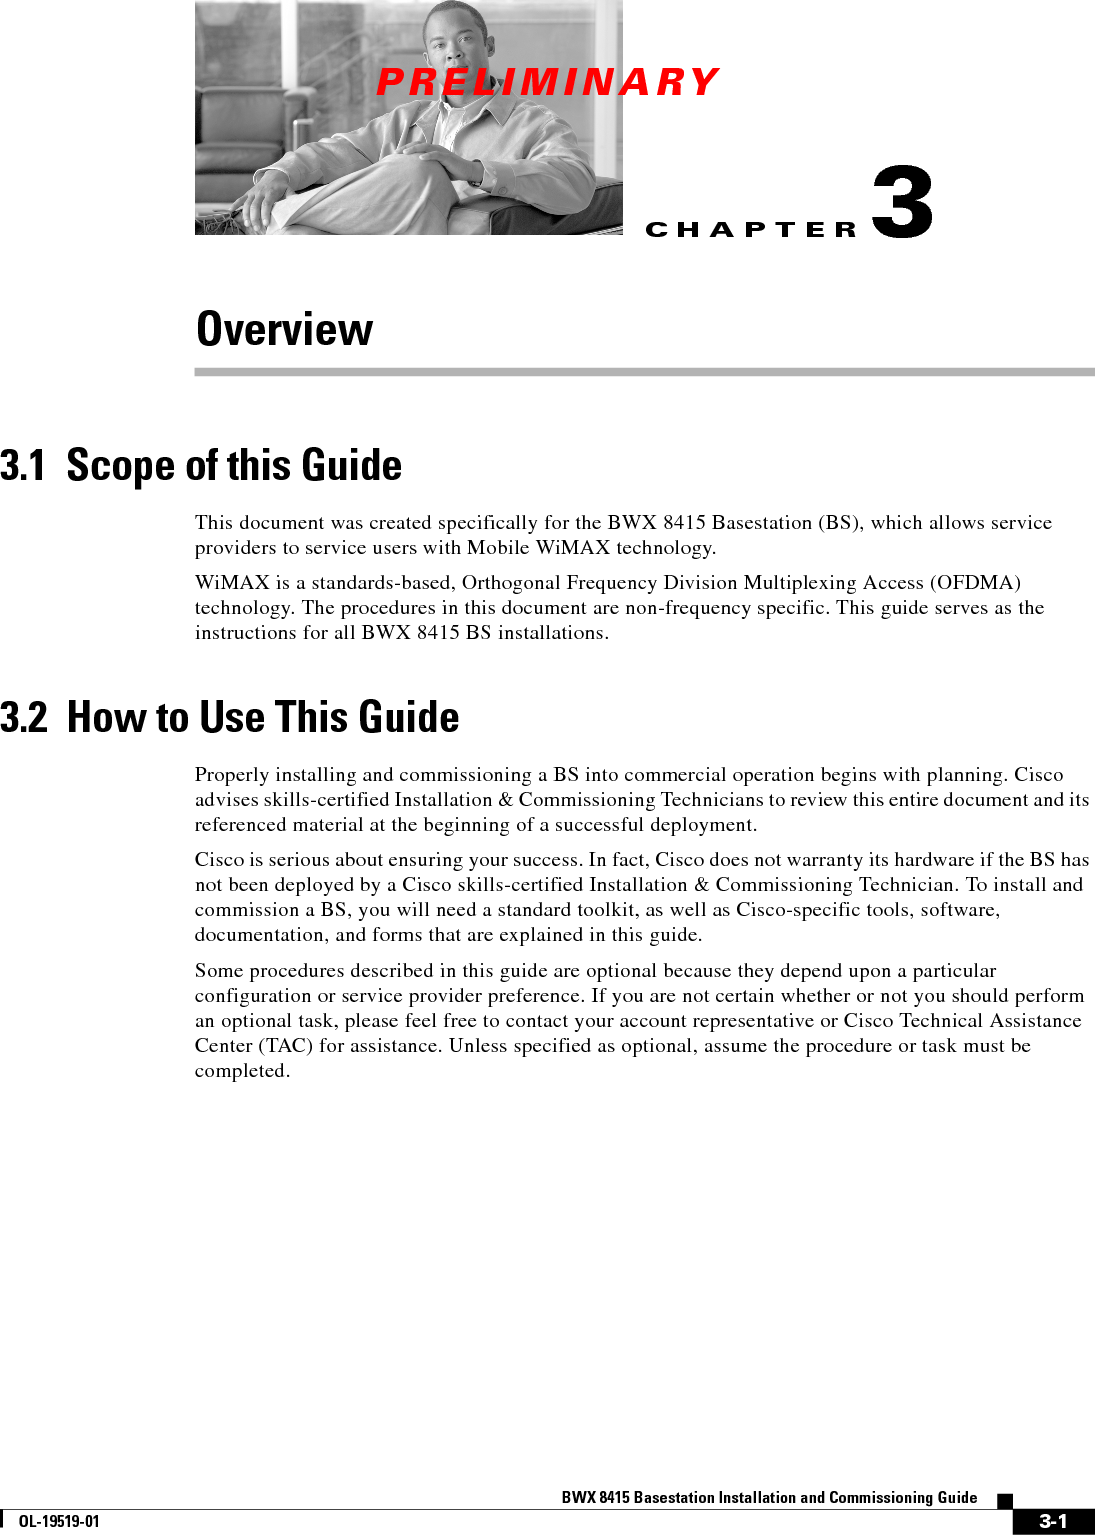 CHAPTERPRELIMINARY3-1BWX 8415 Basestation Installation and Commissioning GuideOL-19519-013Overview3.1  Scope of this GuideThis document was created specifically for the BWX 8415 Basestation (BS), which allows service providers to service users with Mobile WiMAX technology. WiMAX is a standards-based, Orthogonal Frequency Division Multiplexing Access (OFDMA) technology. The procedures in this document are non-frequency specific. This guide serves as the instructions for all BWX 8415 BS installations. 3.2  How to Use This GuideProperly installing and commissioning a BS into commercial operation begins with planning. Cisco advises skills-certified Installation &amp; Commissioning Technicians to review this entire document and its referenced material at the beginning of a successful deployment. Cisco is serious about ensuring your success. In fact, Cisco does not warranty its hardware if the BS has not been deployed by a Cisco skills-certified Installation &amp; Commissioning Technician. To install and commission a BS, you will need a standard toolkit, as well as Cisco-specific tools, software, documentation, and forms that are explained in this guide.Some procedures described in this guide are optional because they depend upon a particular configuration or service provider preference. If you are not certain whether or not you should perform an optional task, please feel free to contact your account representative or Cisco Technical Assistance Center (TAC) for assistance. Unless specified as optional, assume the procedure or task must be completed.